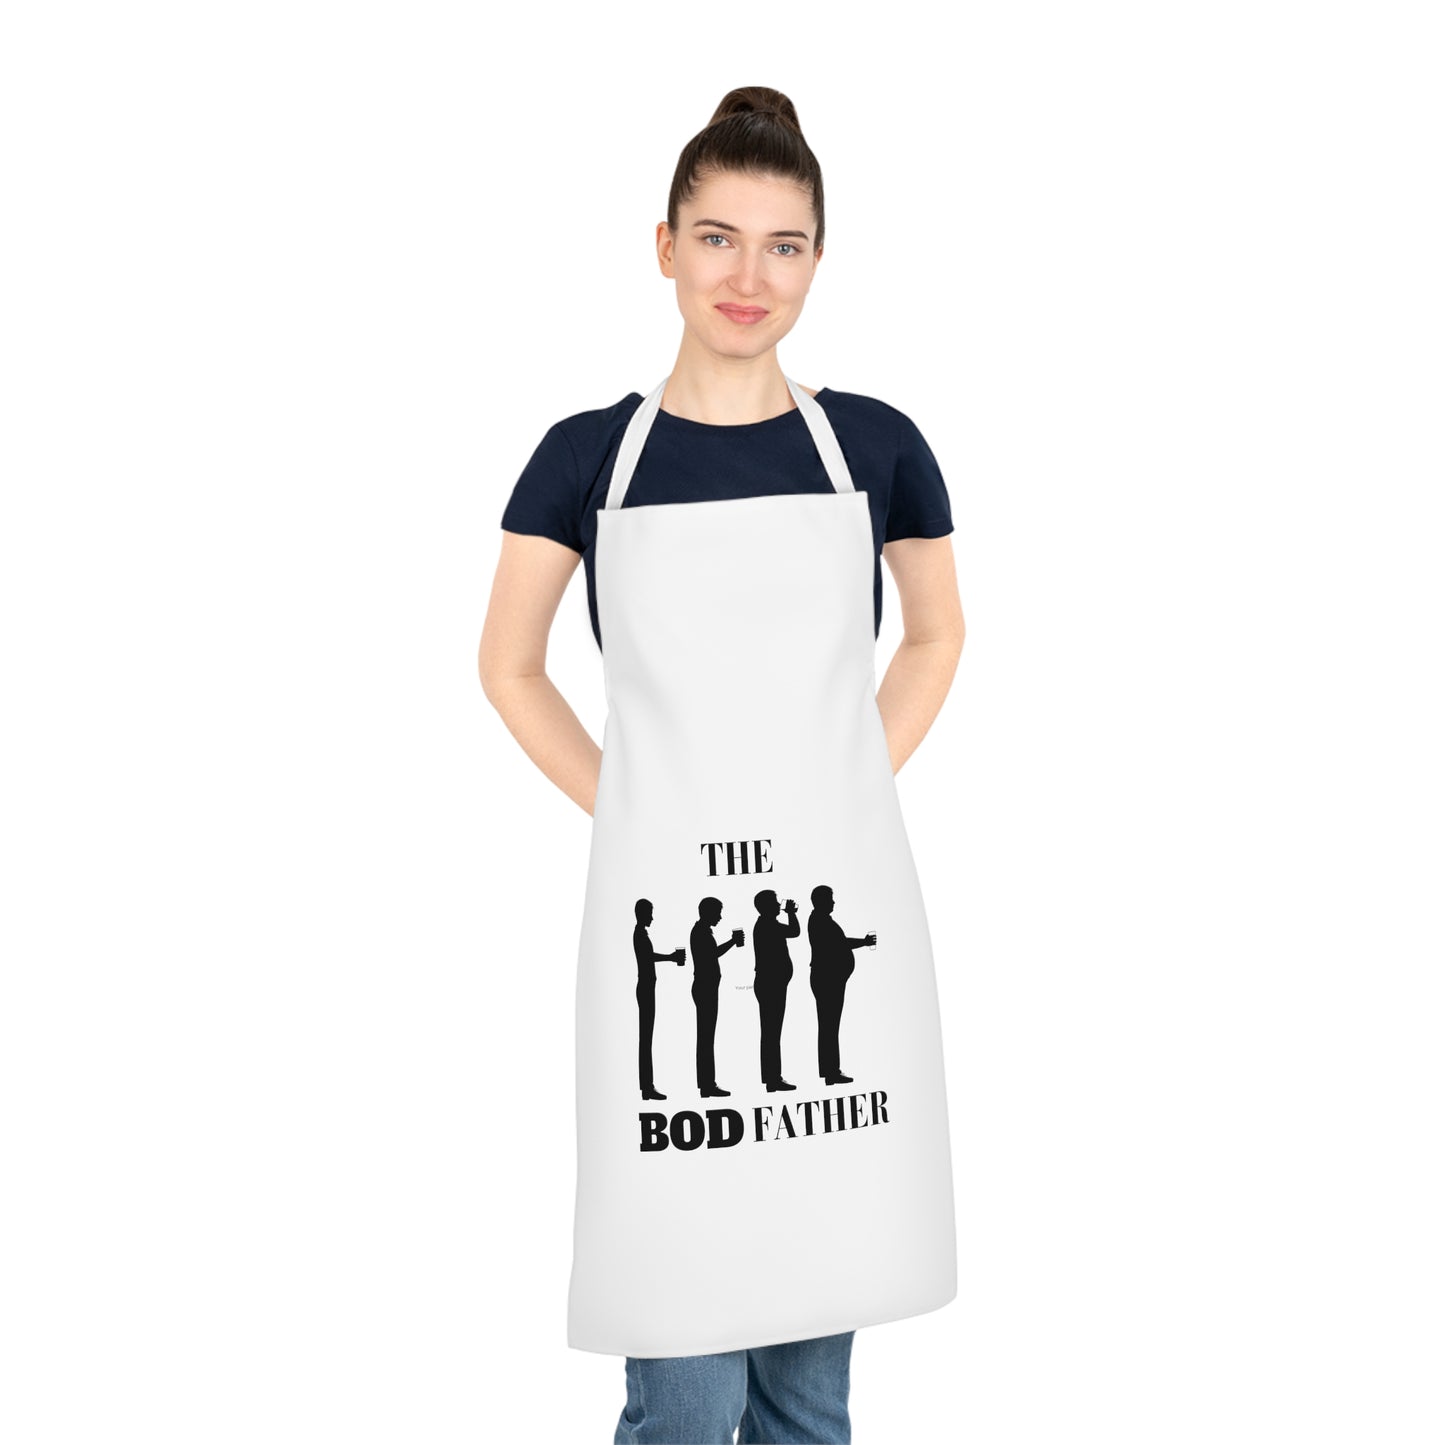 The Bodfather - Adult Apron (AOP)